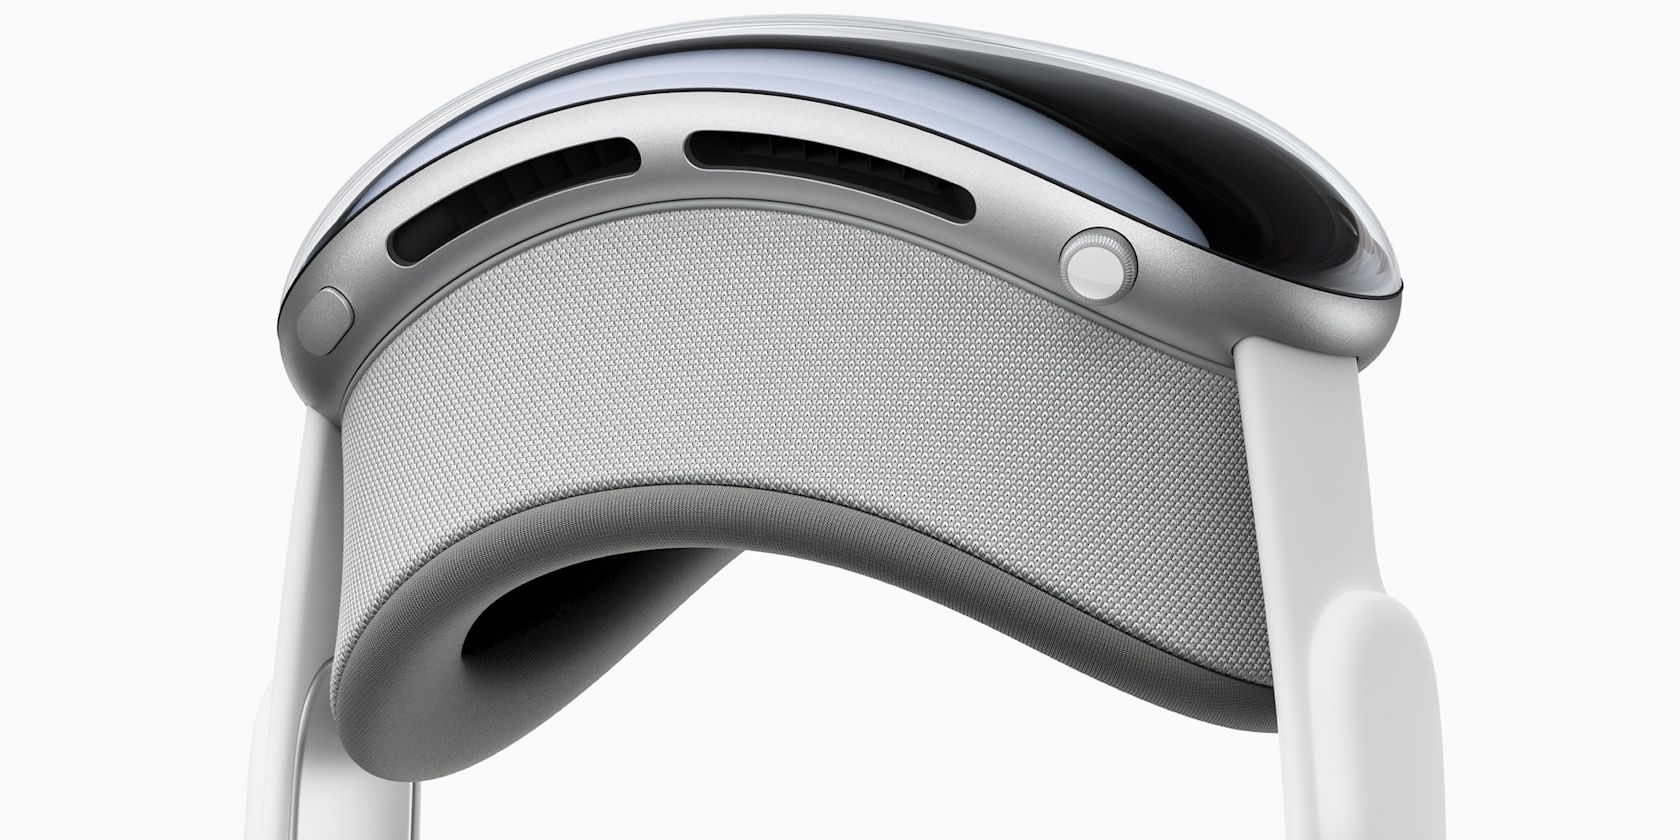 Top view of the Apple Vision Pro AR headset